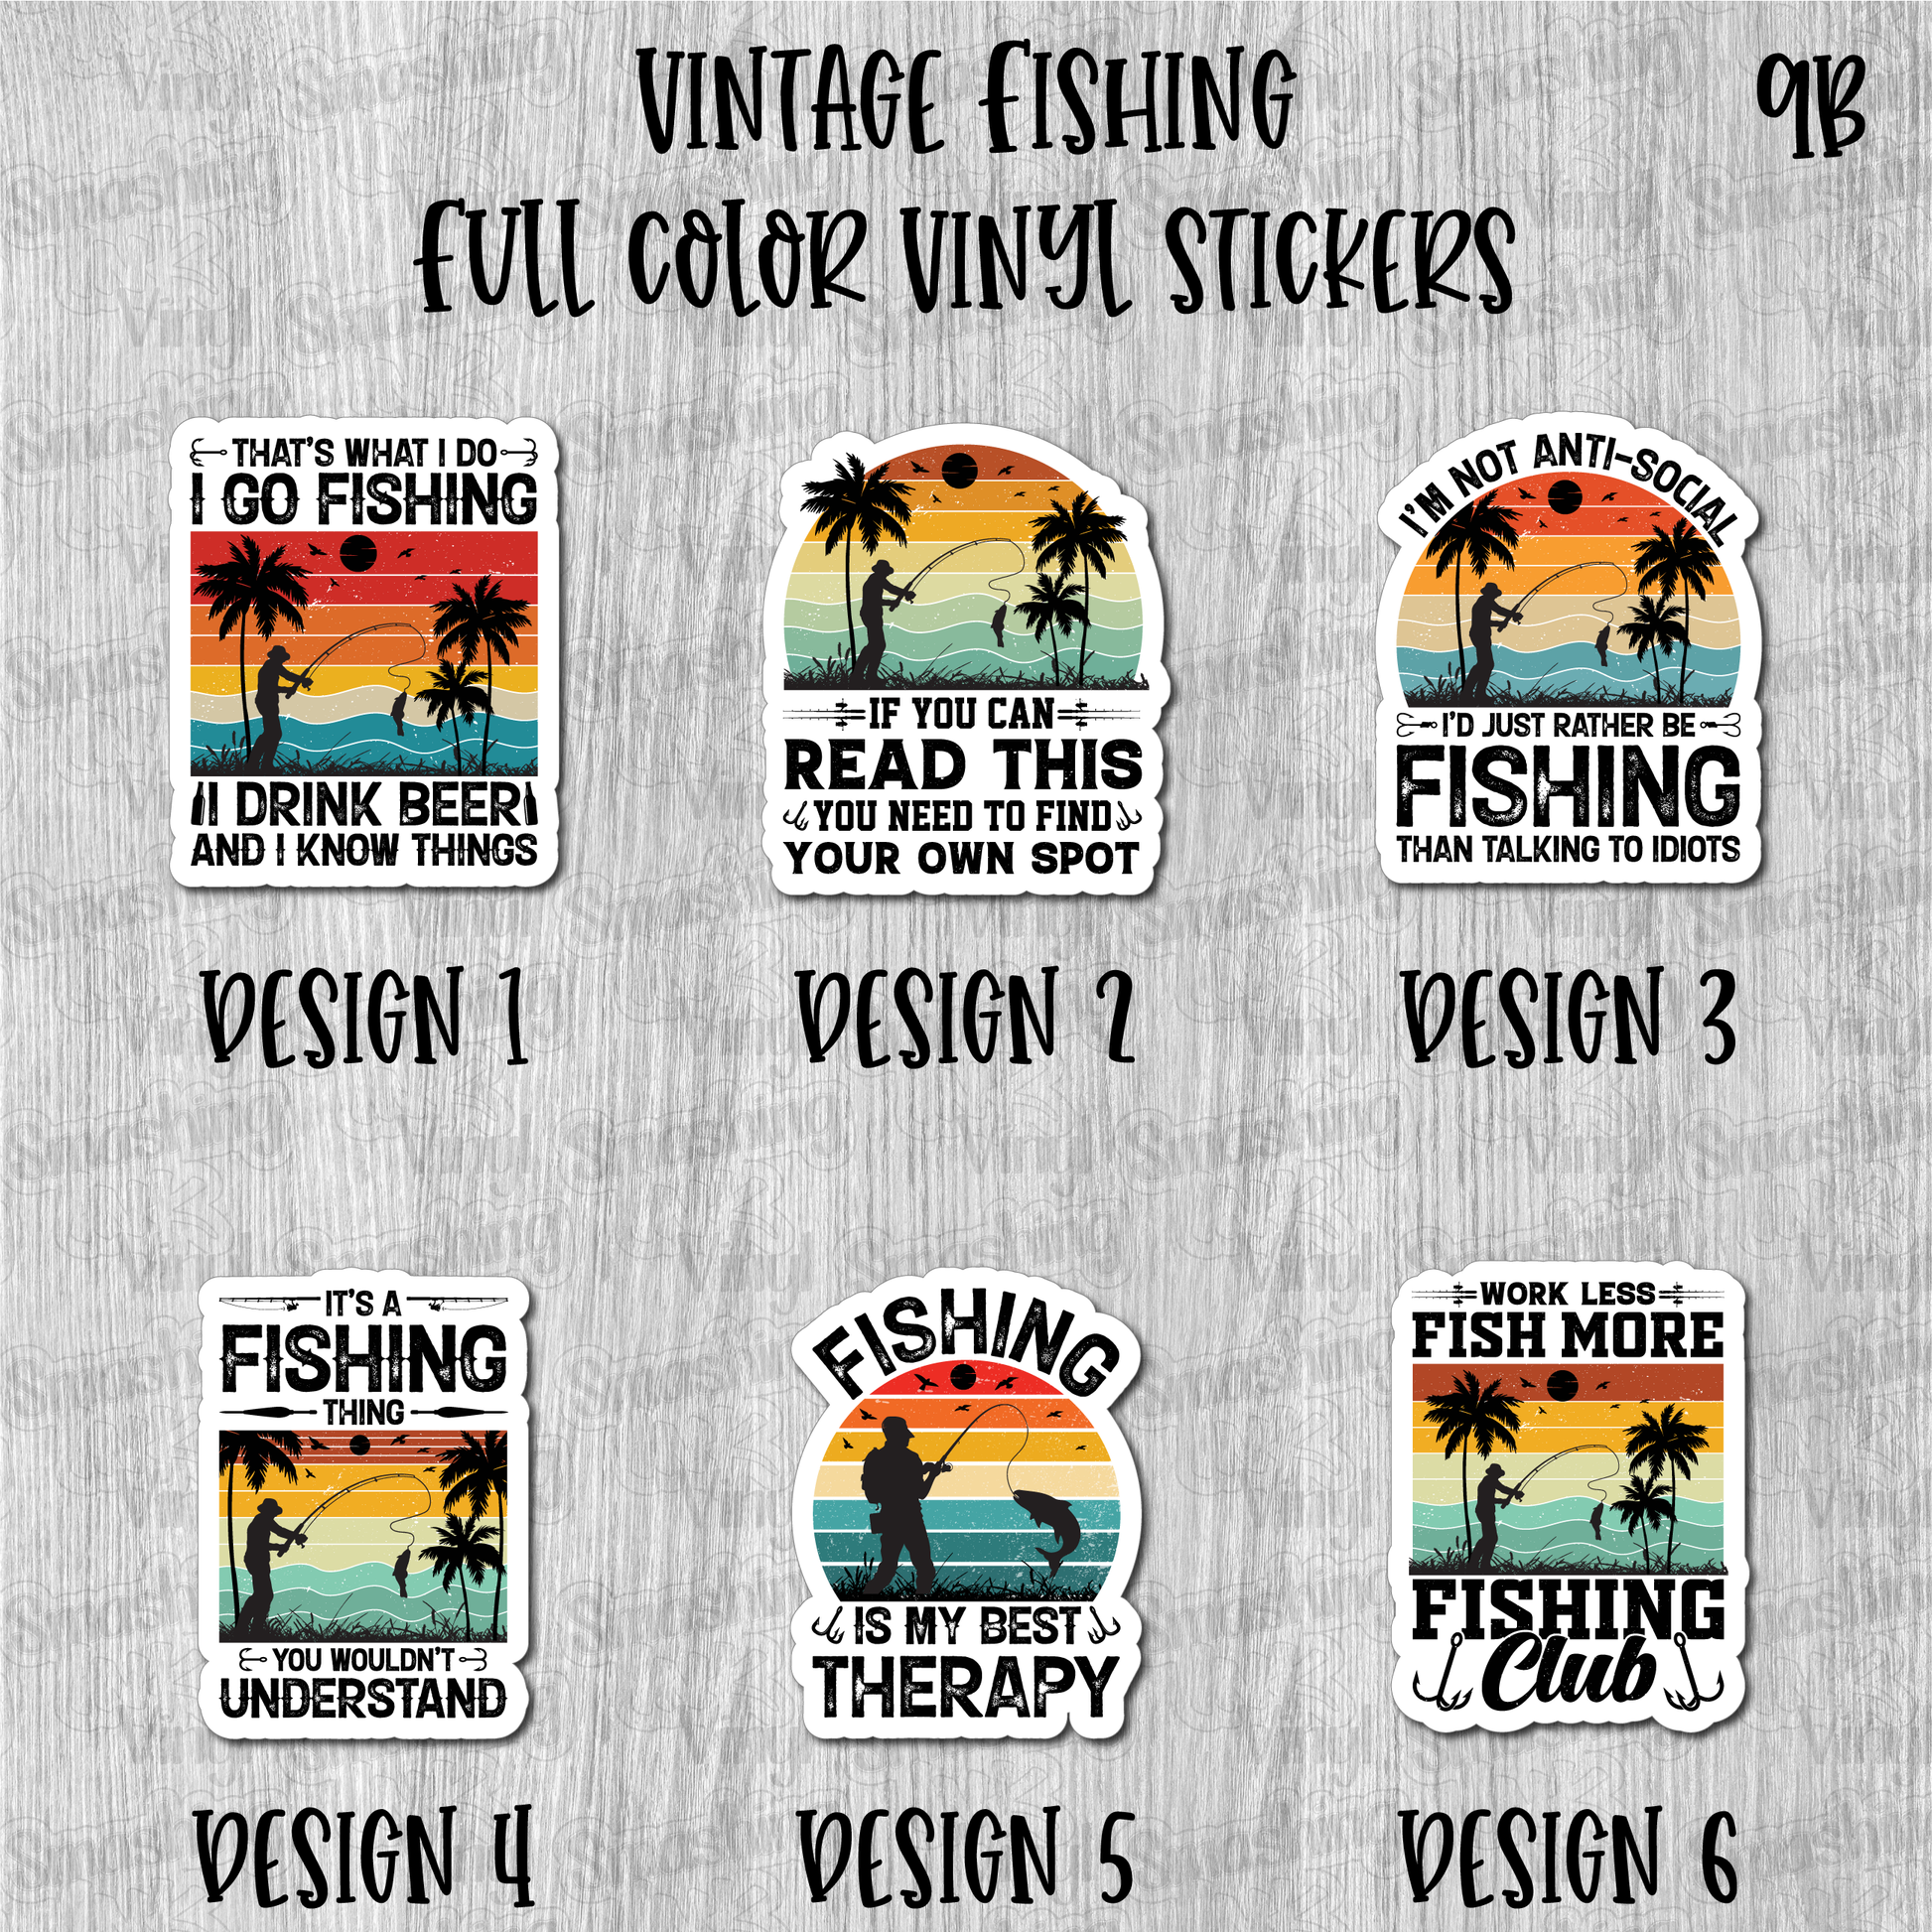 Vintage Fishing - Full Color Vinyl Stickers (SHIPS IN 3-7 BUS DAYS)